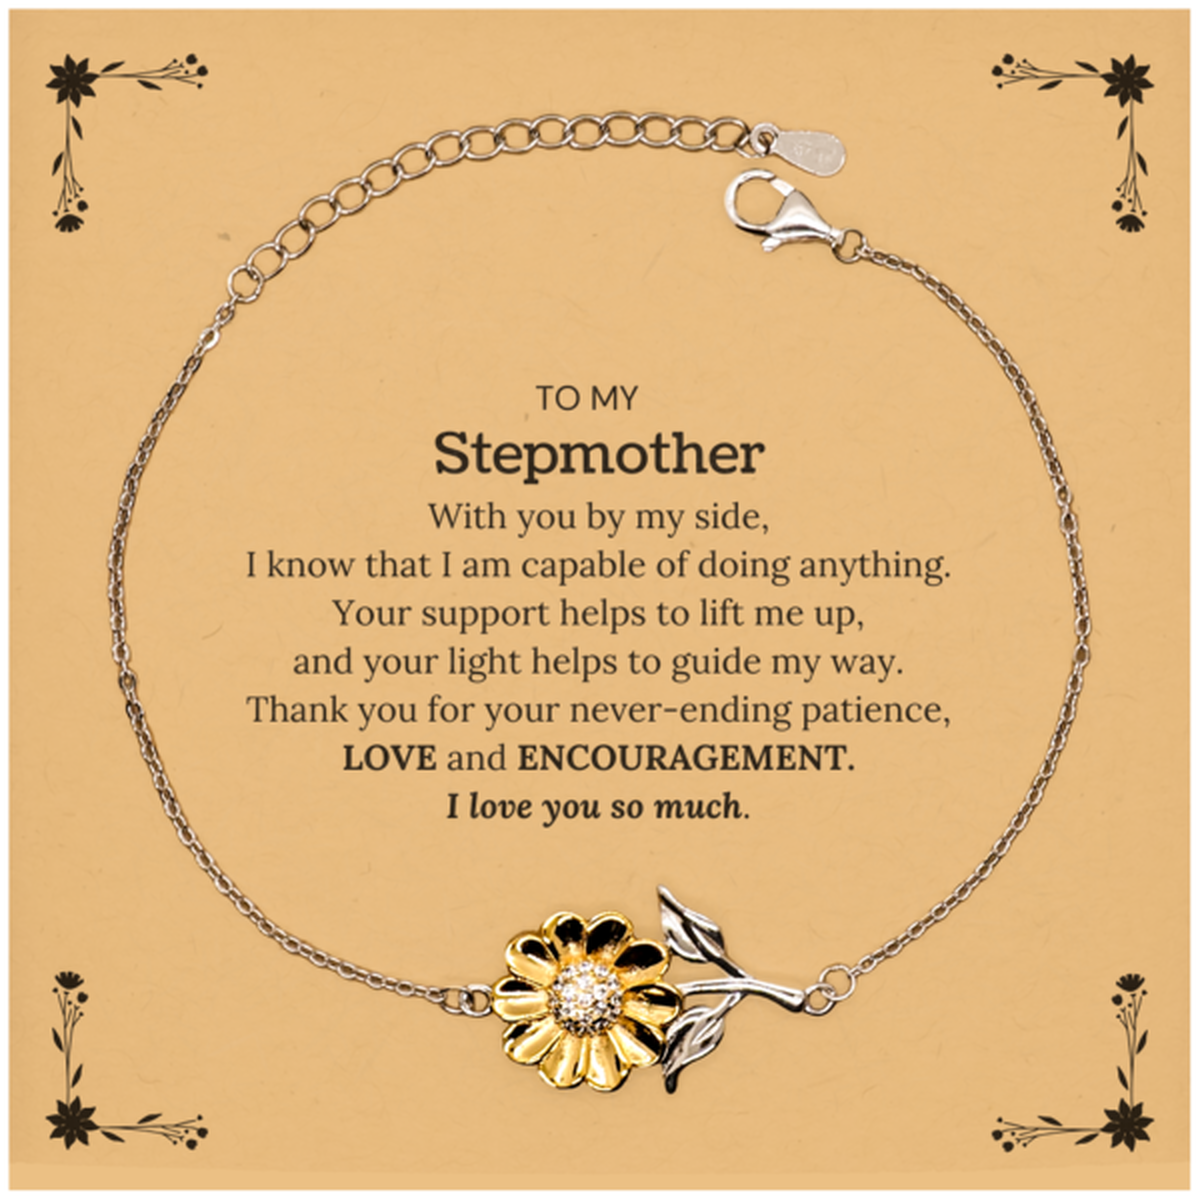 Appreciation Stepmother Sunflower Bracelet Gifts, To My Stepmother Birthday Christmas Wedding Keepsake Gifts for Stepmother With you by my side, I know that I am capable of doing anything. I love you so much